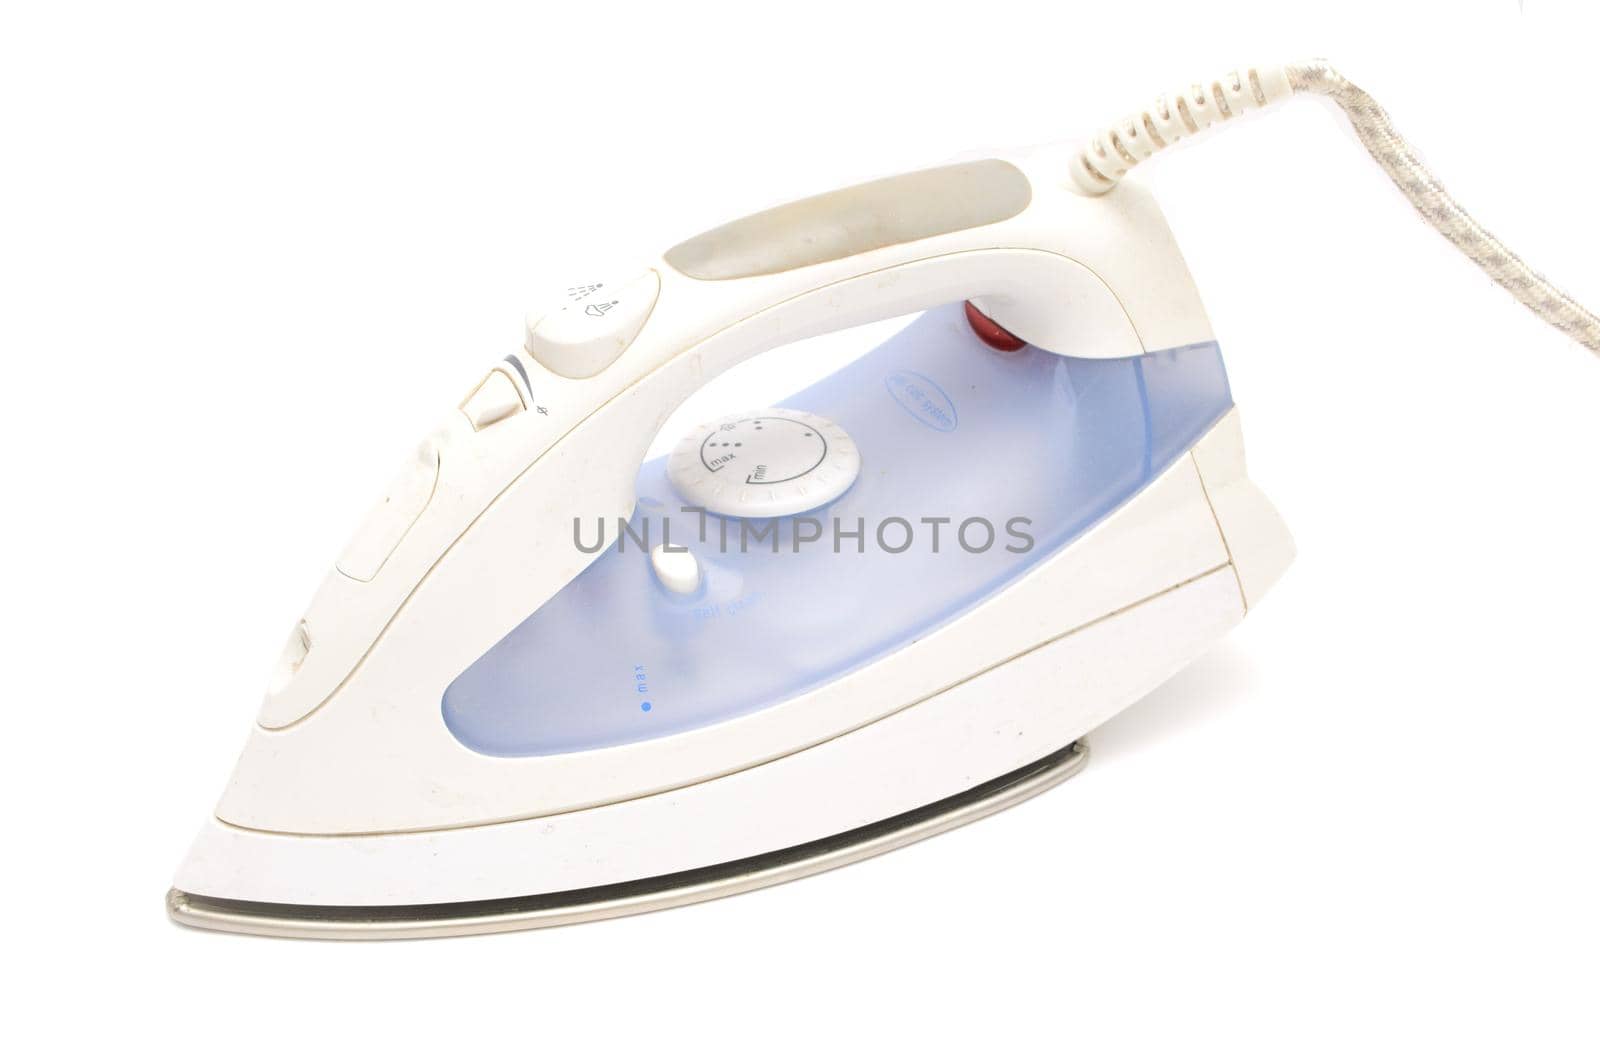 Steam iron isolated on white background